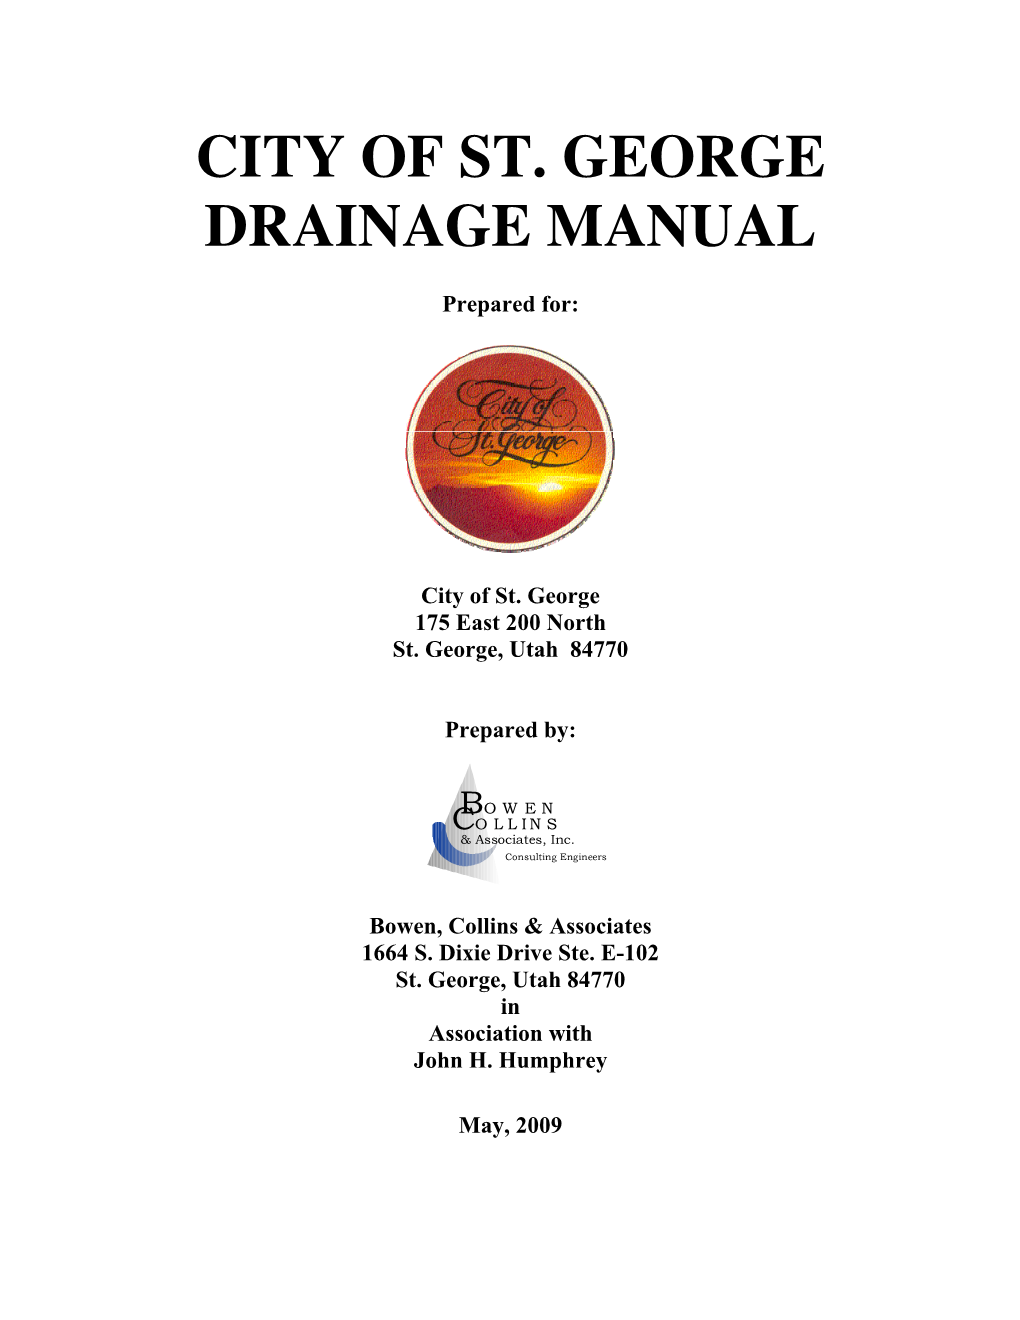 City of St. George Drainage Manual